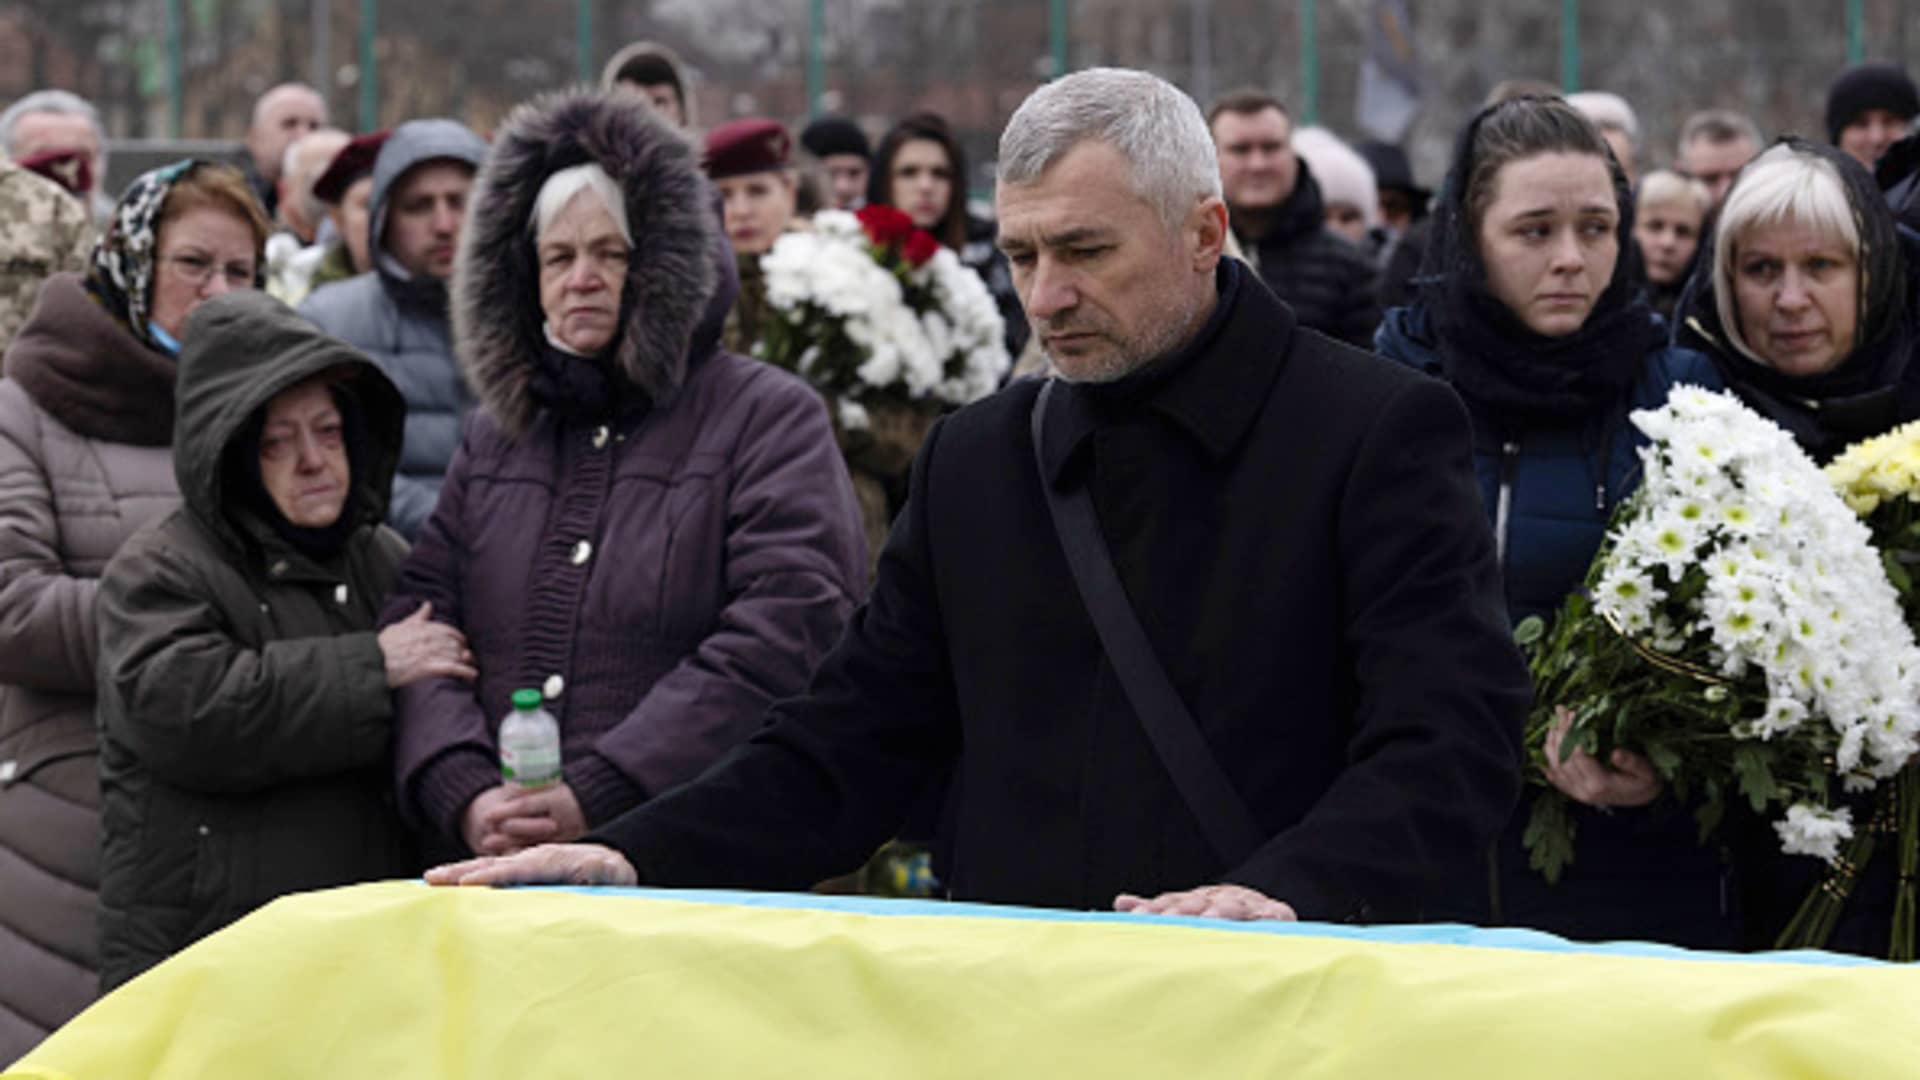 Father of Ivan, Yuriy, pauses over his sons coffin during a service at Lychakiv cemetery during a joint funeral for two soldiers who died in the east of the country during recent fighting, on March 08, 2022 in Lviv, Ukraine.